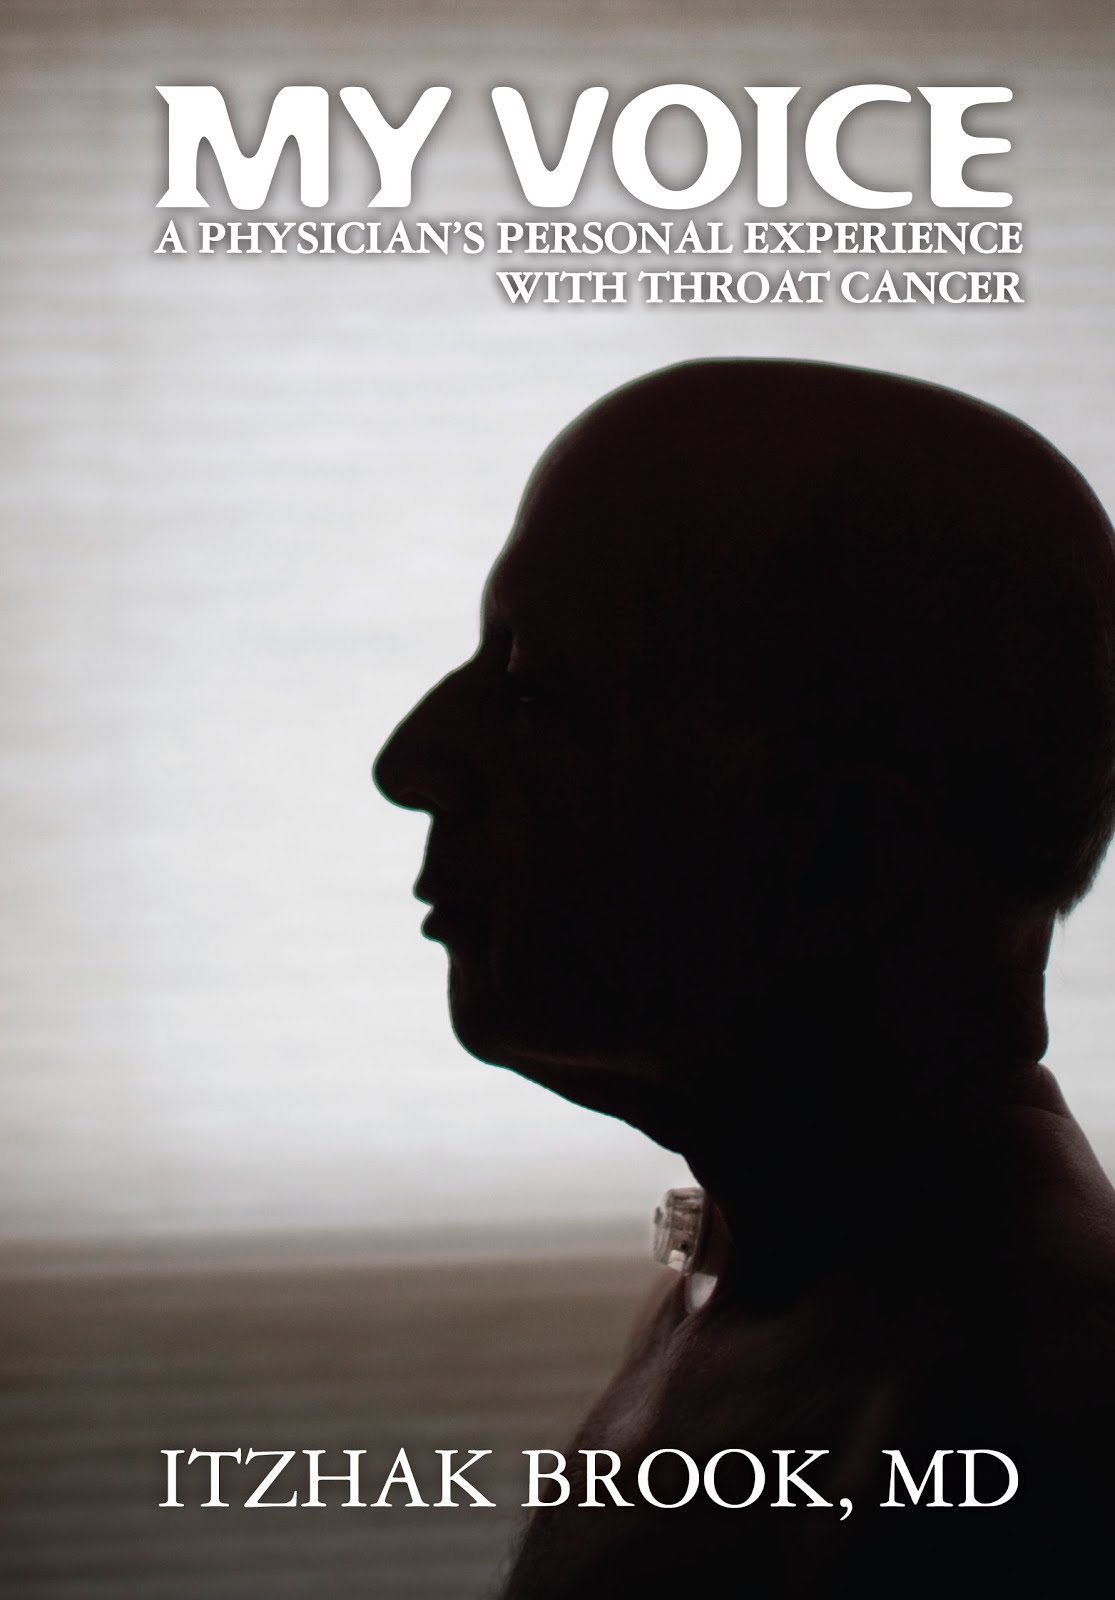 Dr. Brook's book: "My Voice a physician's personal experience with throat cancer"